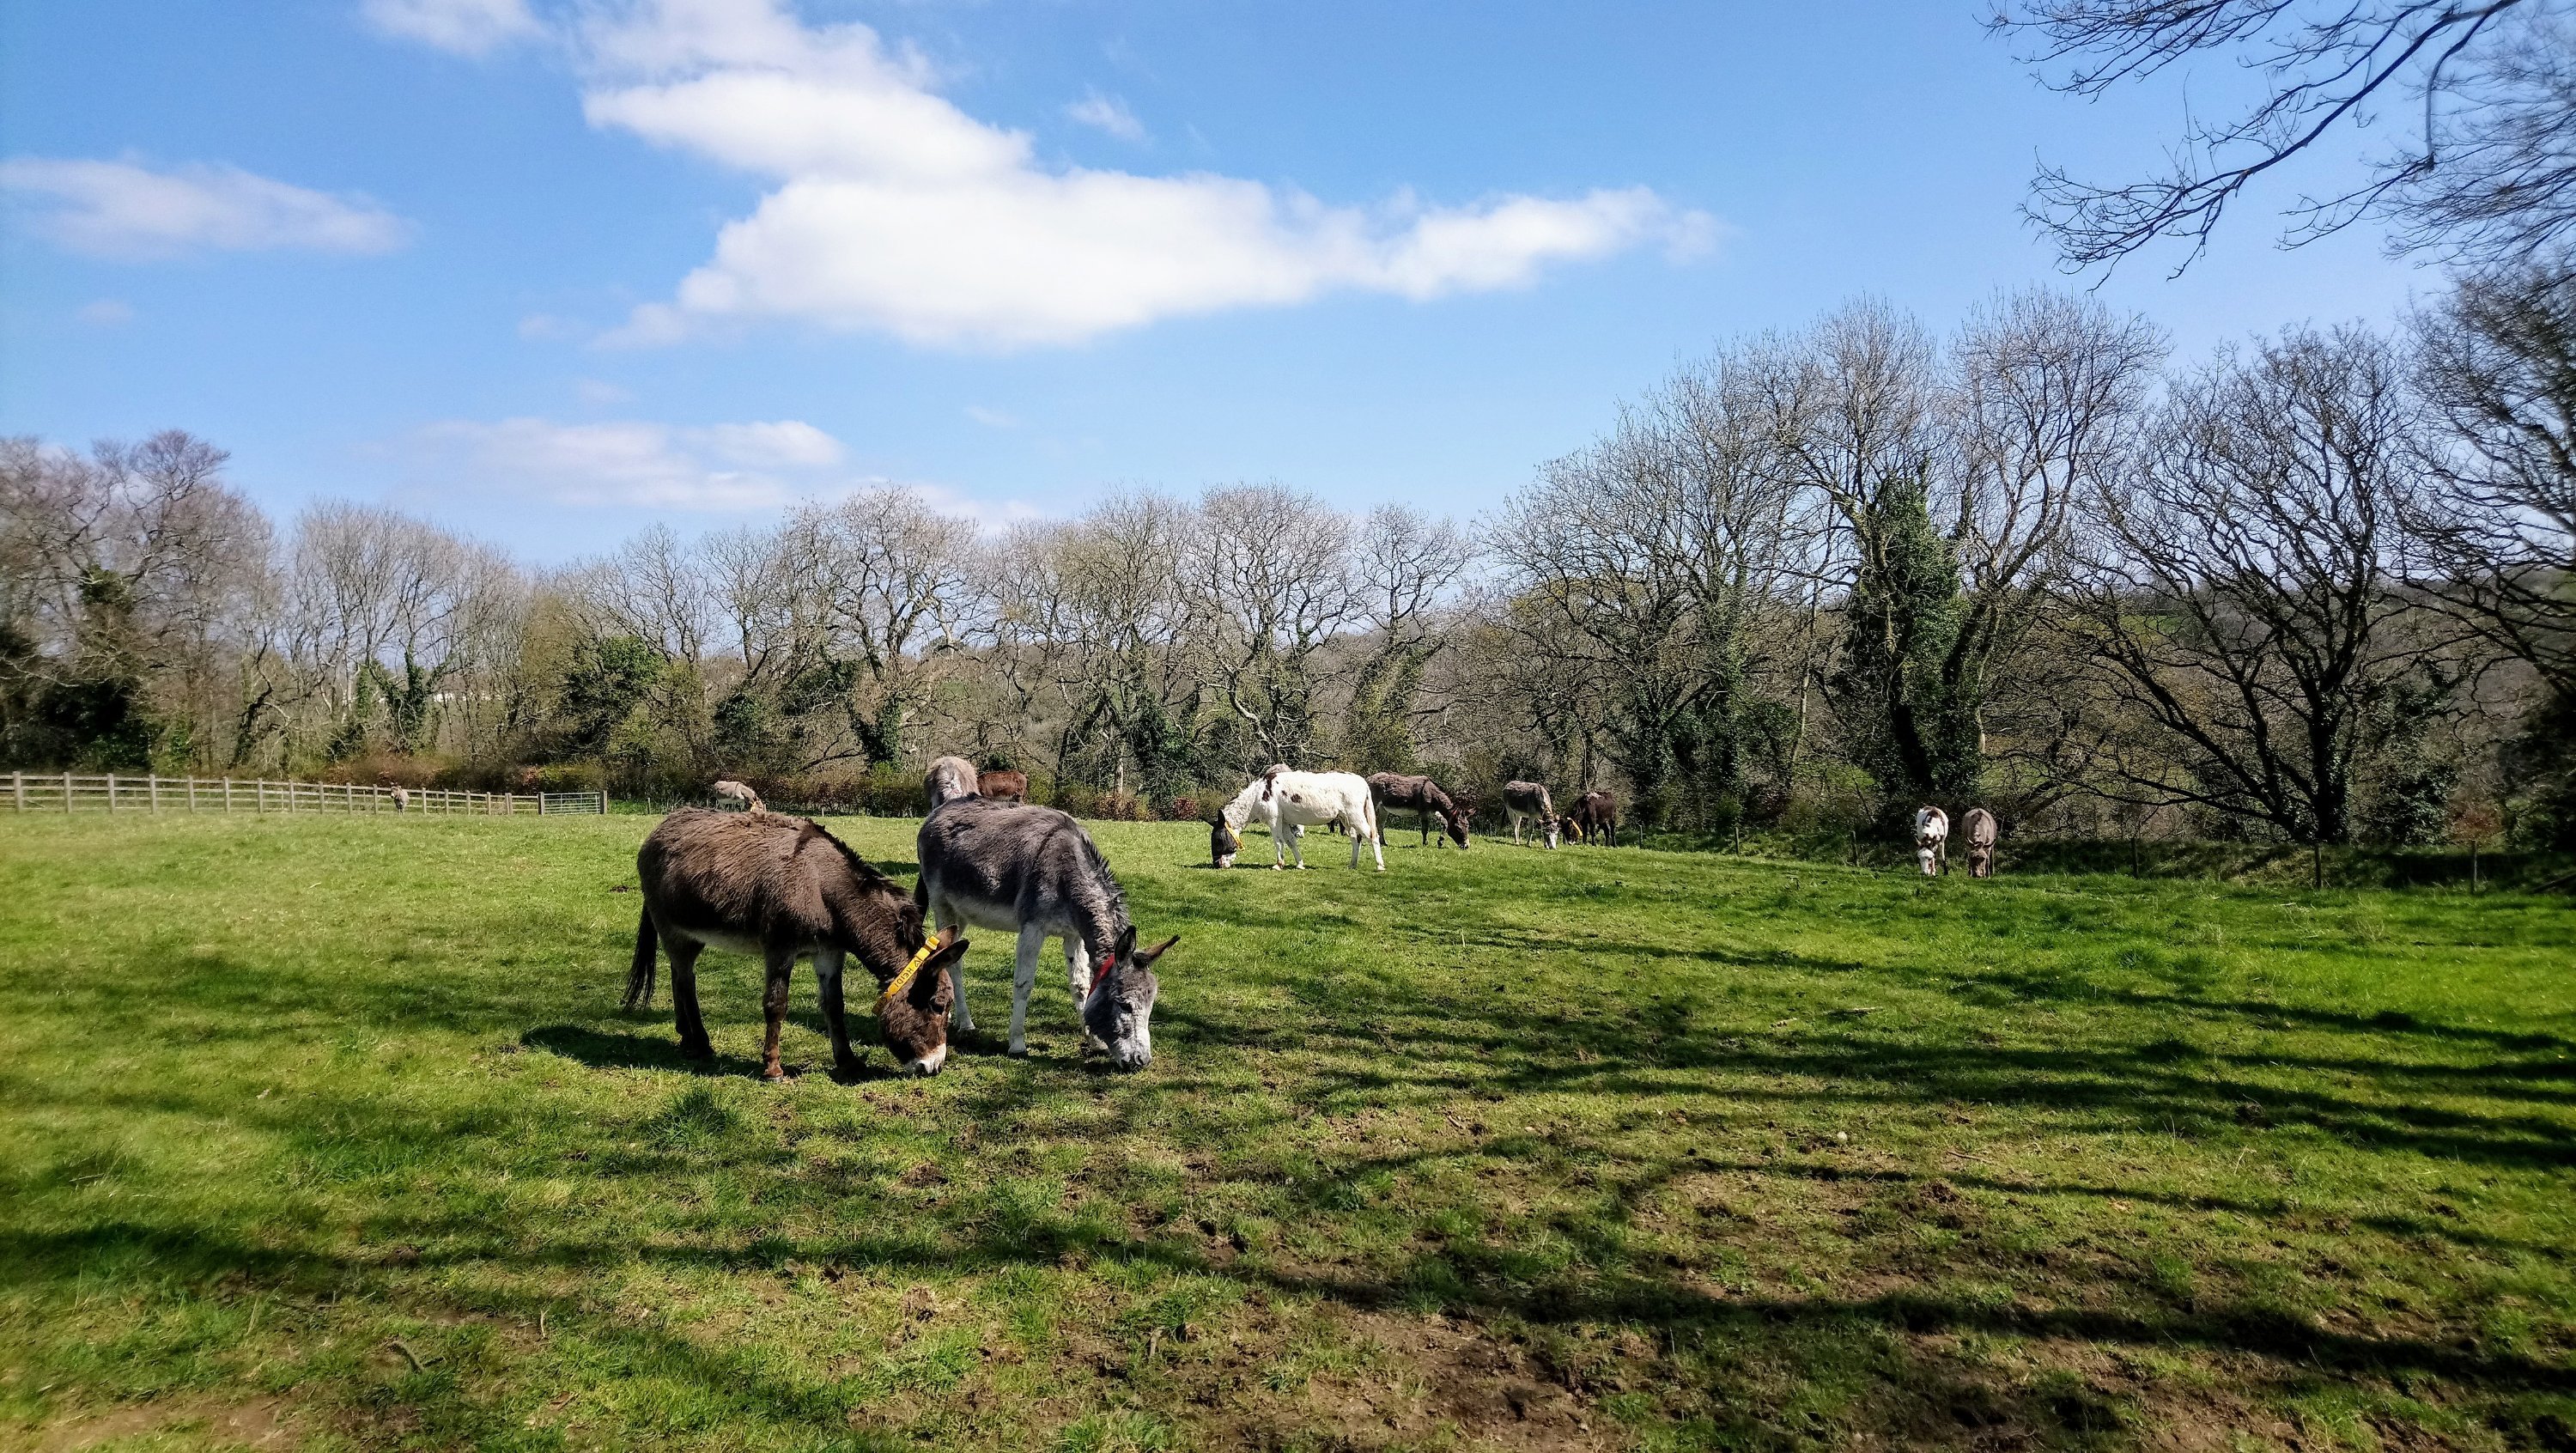 Donkeys in a field at the Sanctuary on a sunny day